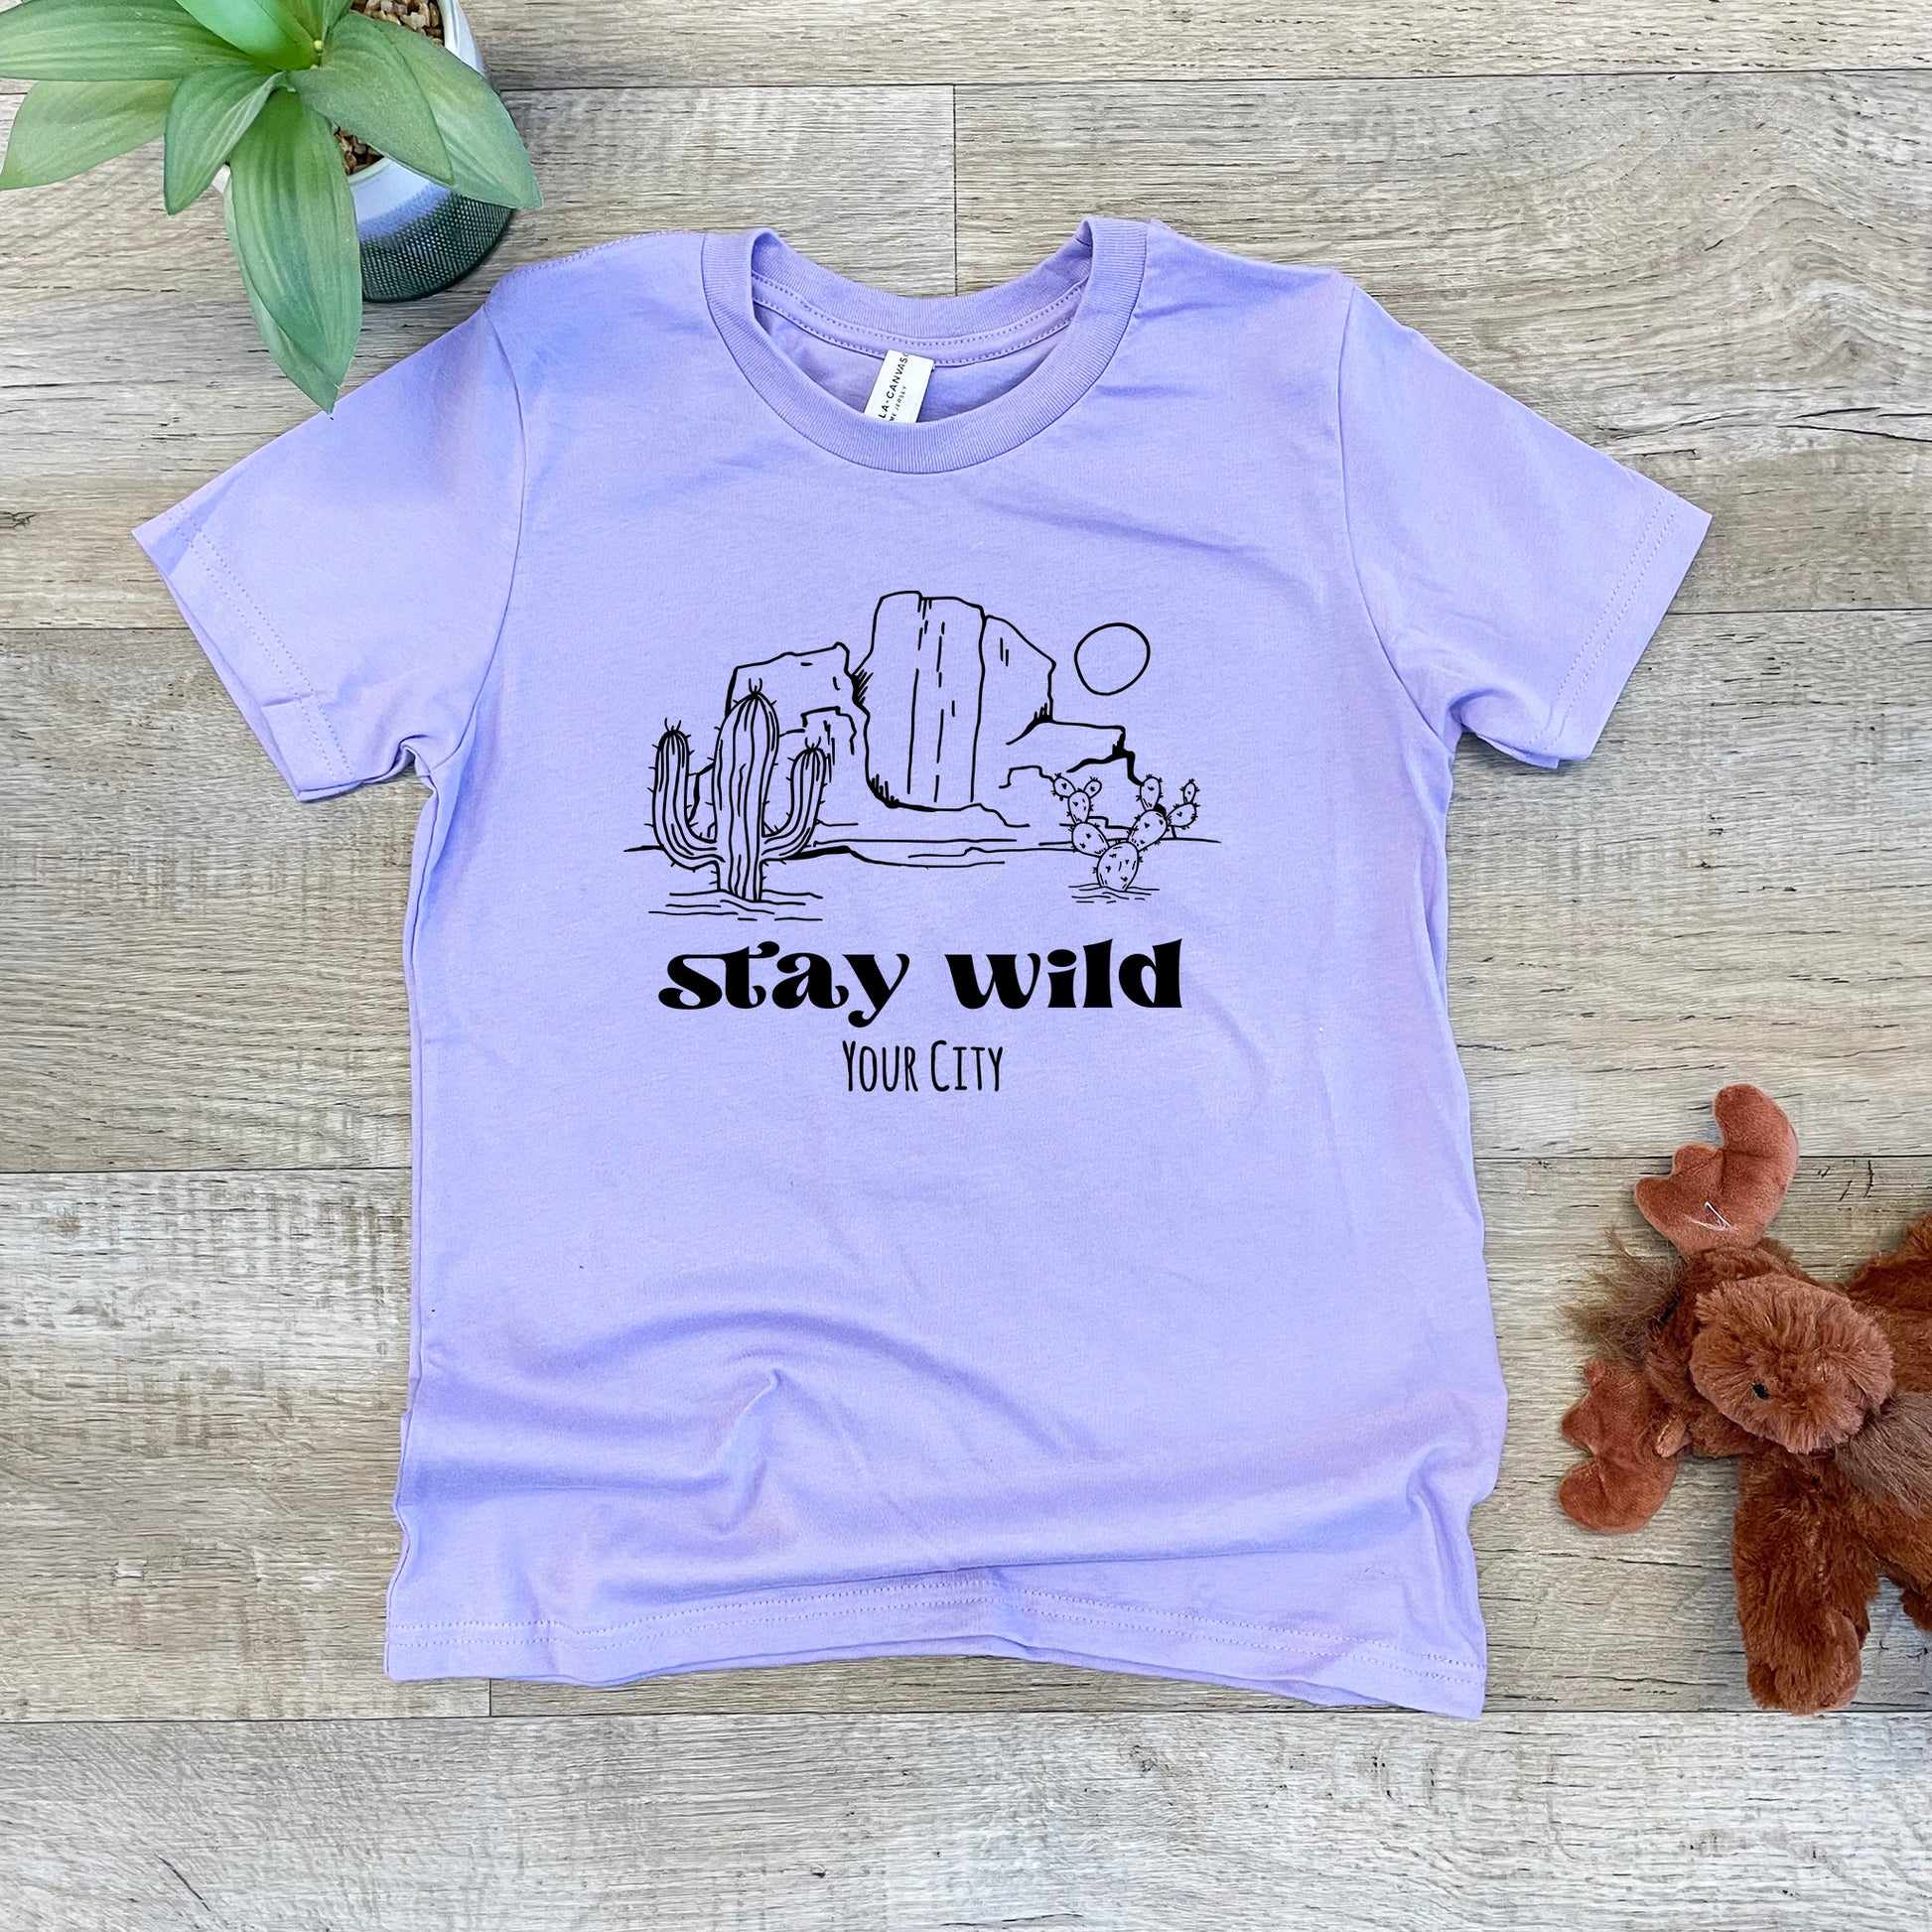 a t - shirt that says stay wild in front of a teddy bear